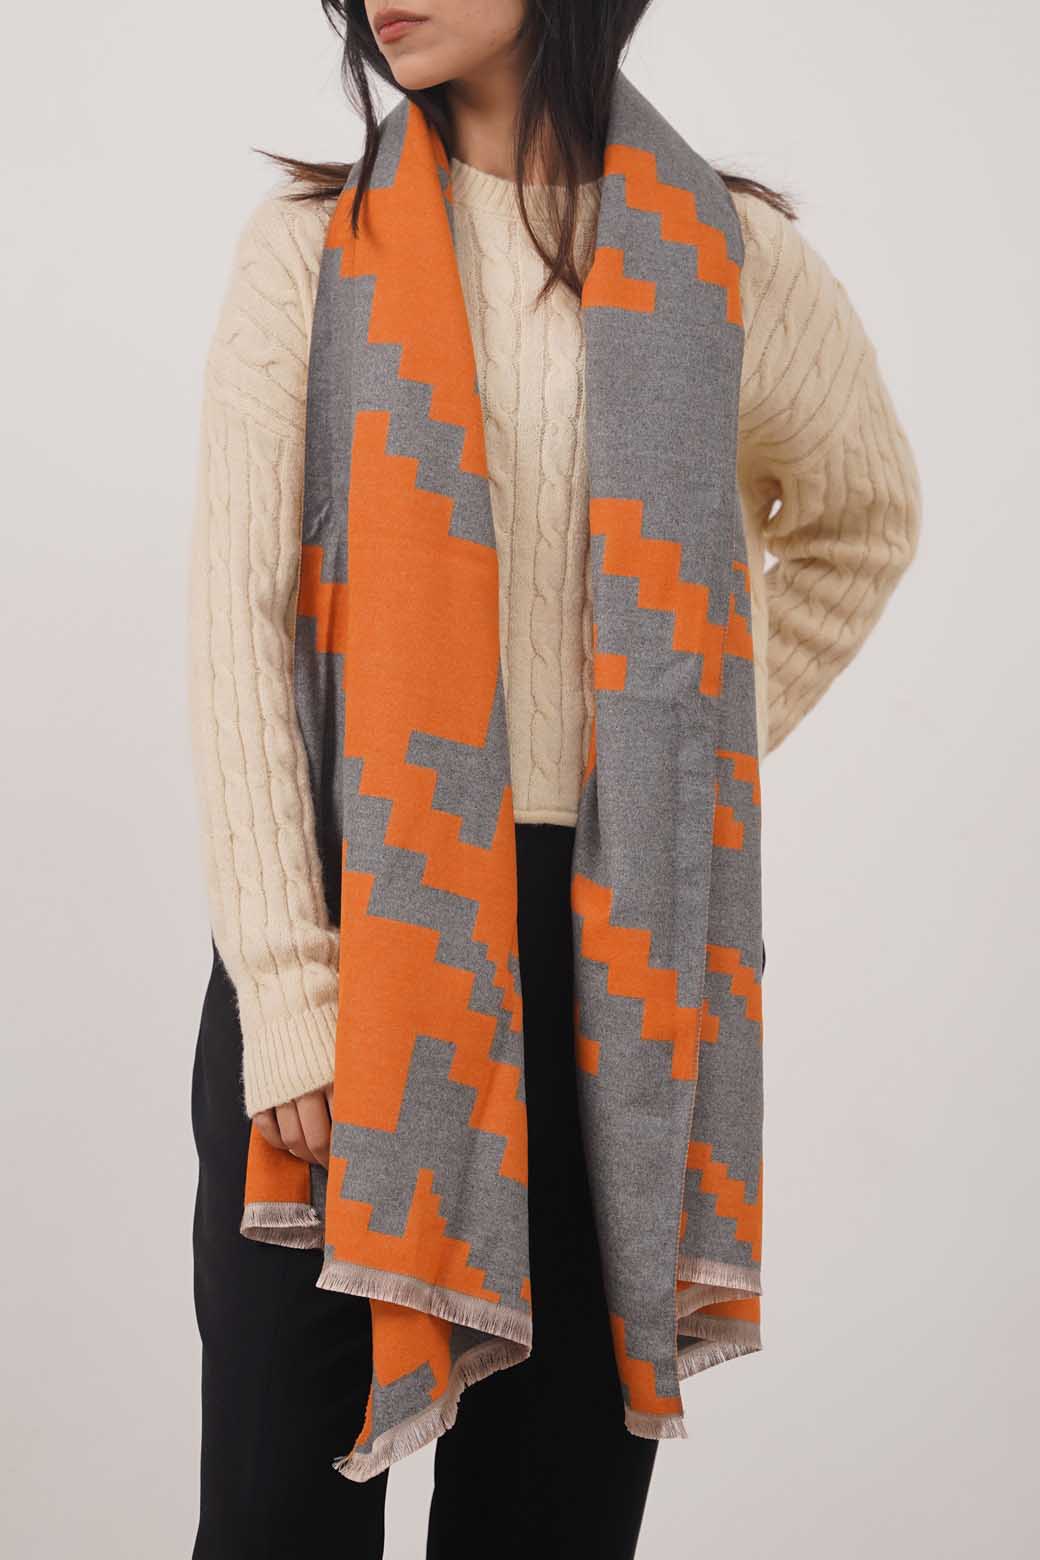 RUST BOLD HOUNDSTOOTH PATTERN SCARF